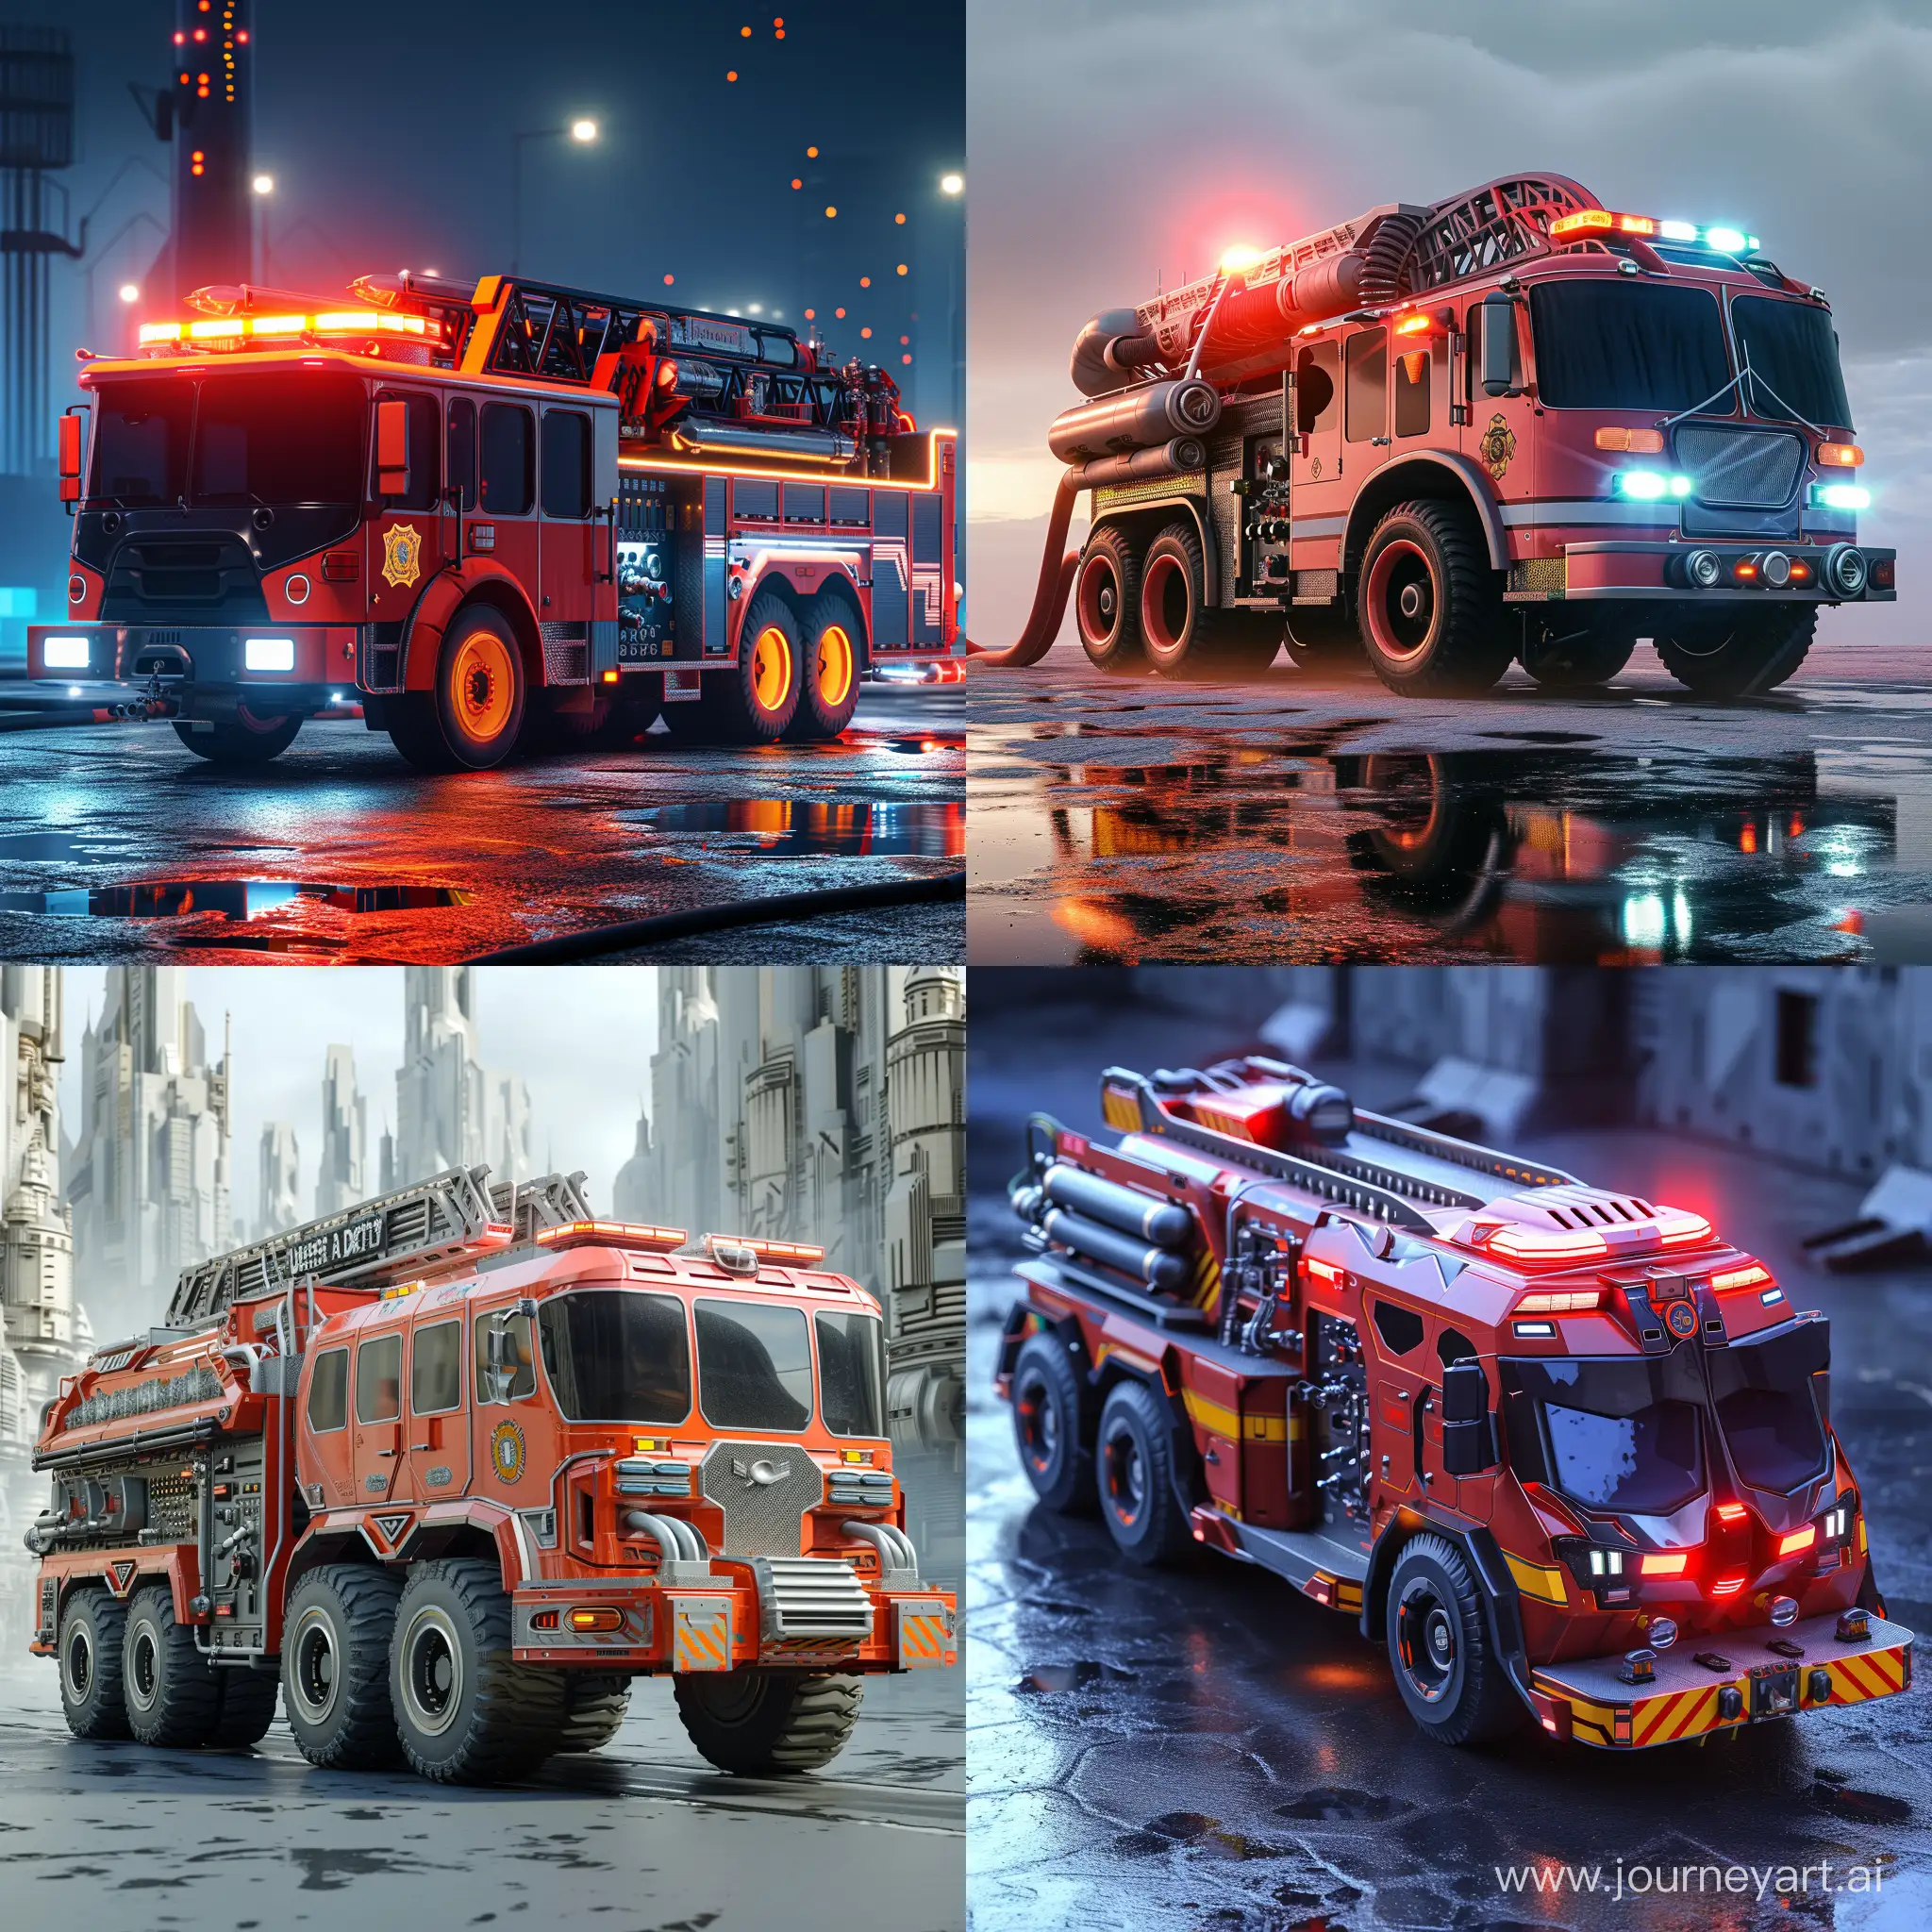 Futuristic-Fire-Truck-Responding-to-Emergency-in-Distant-Future